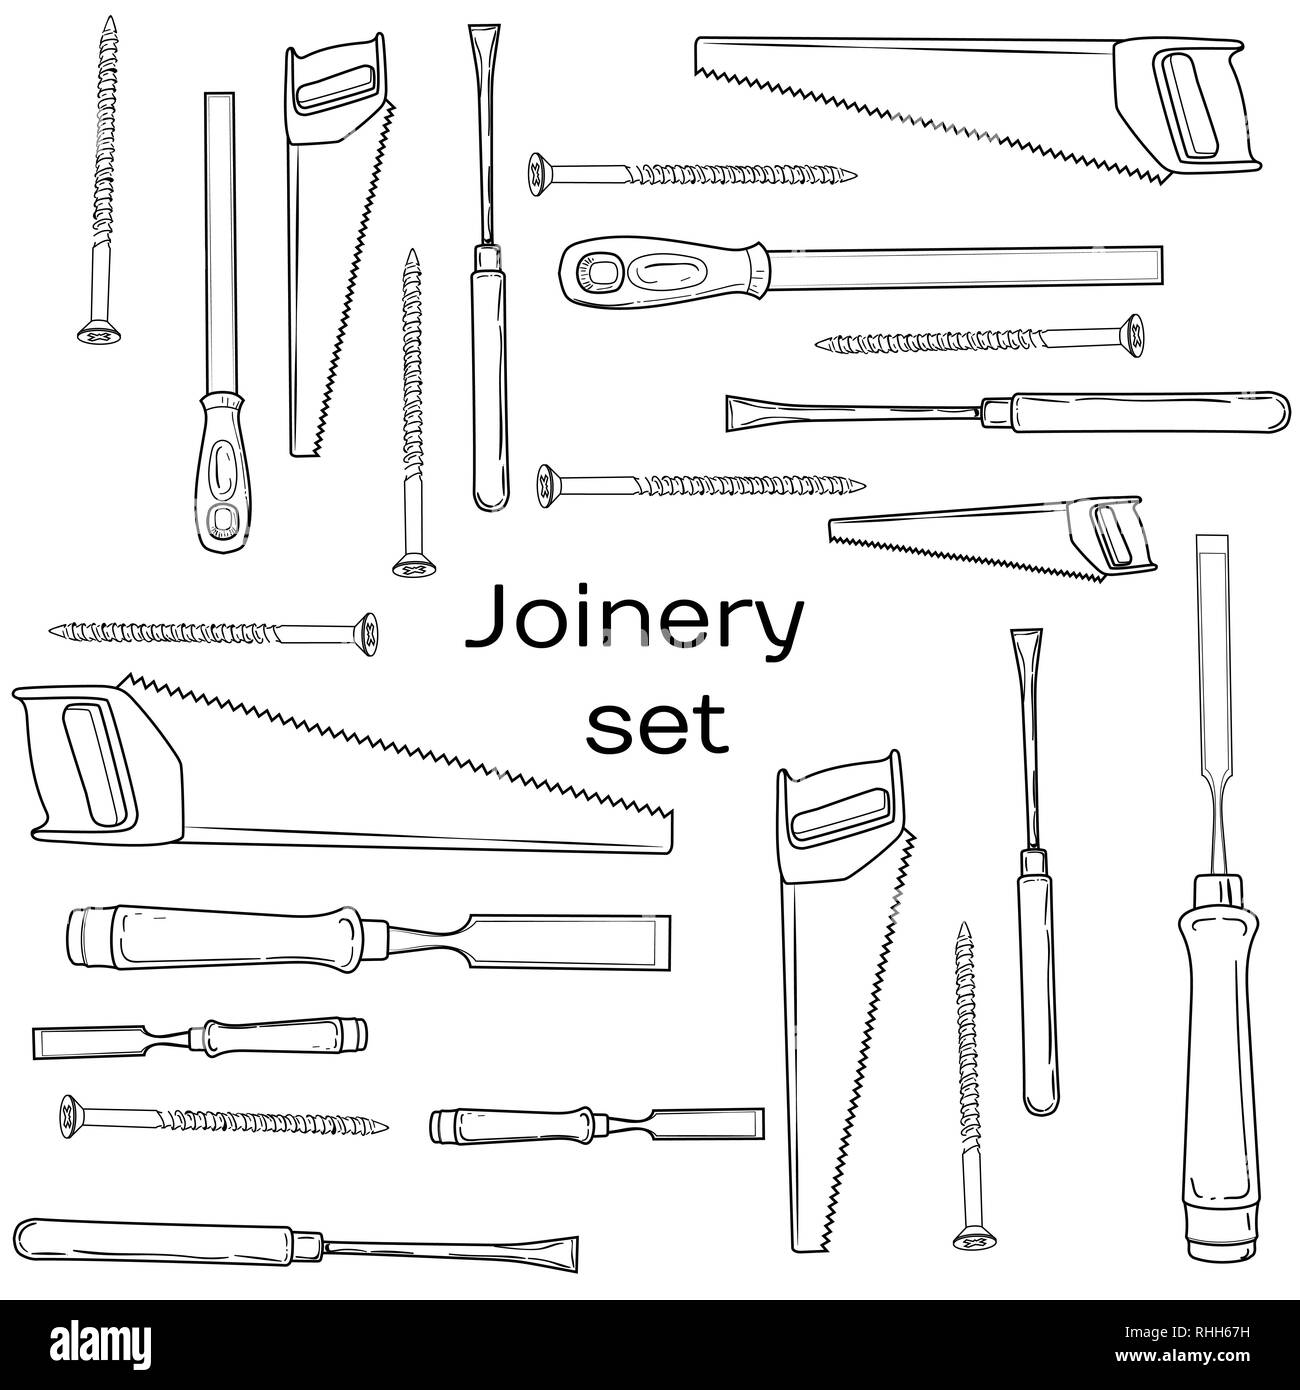 Joinery icons set. Carpenter character at work. Woodworking tools of antique joinery - Craft Woodwork Screwdriver Table Hamme, Carpenter. Stock Vector